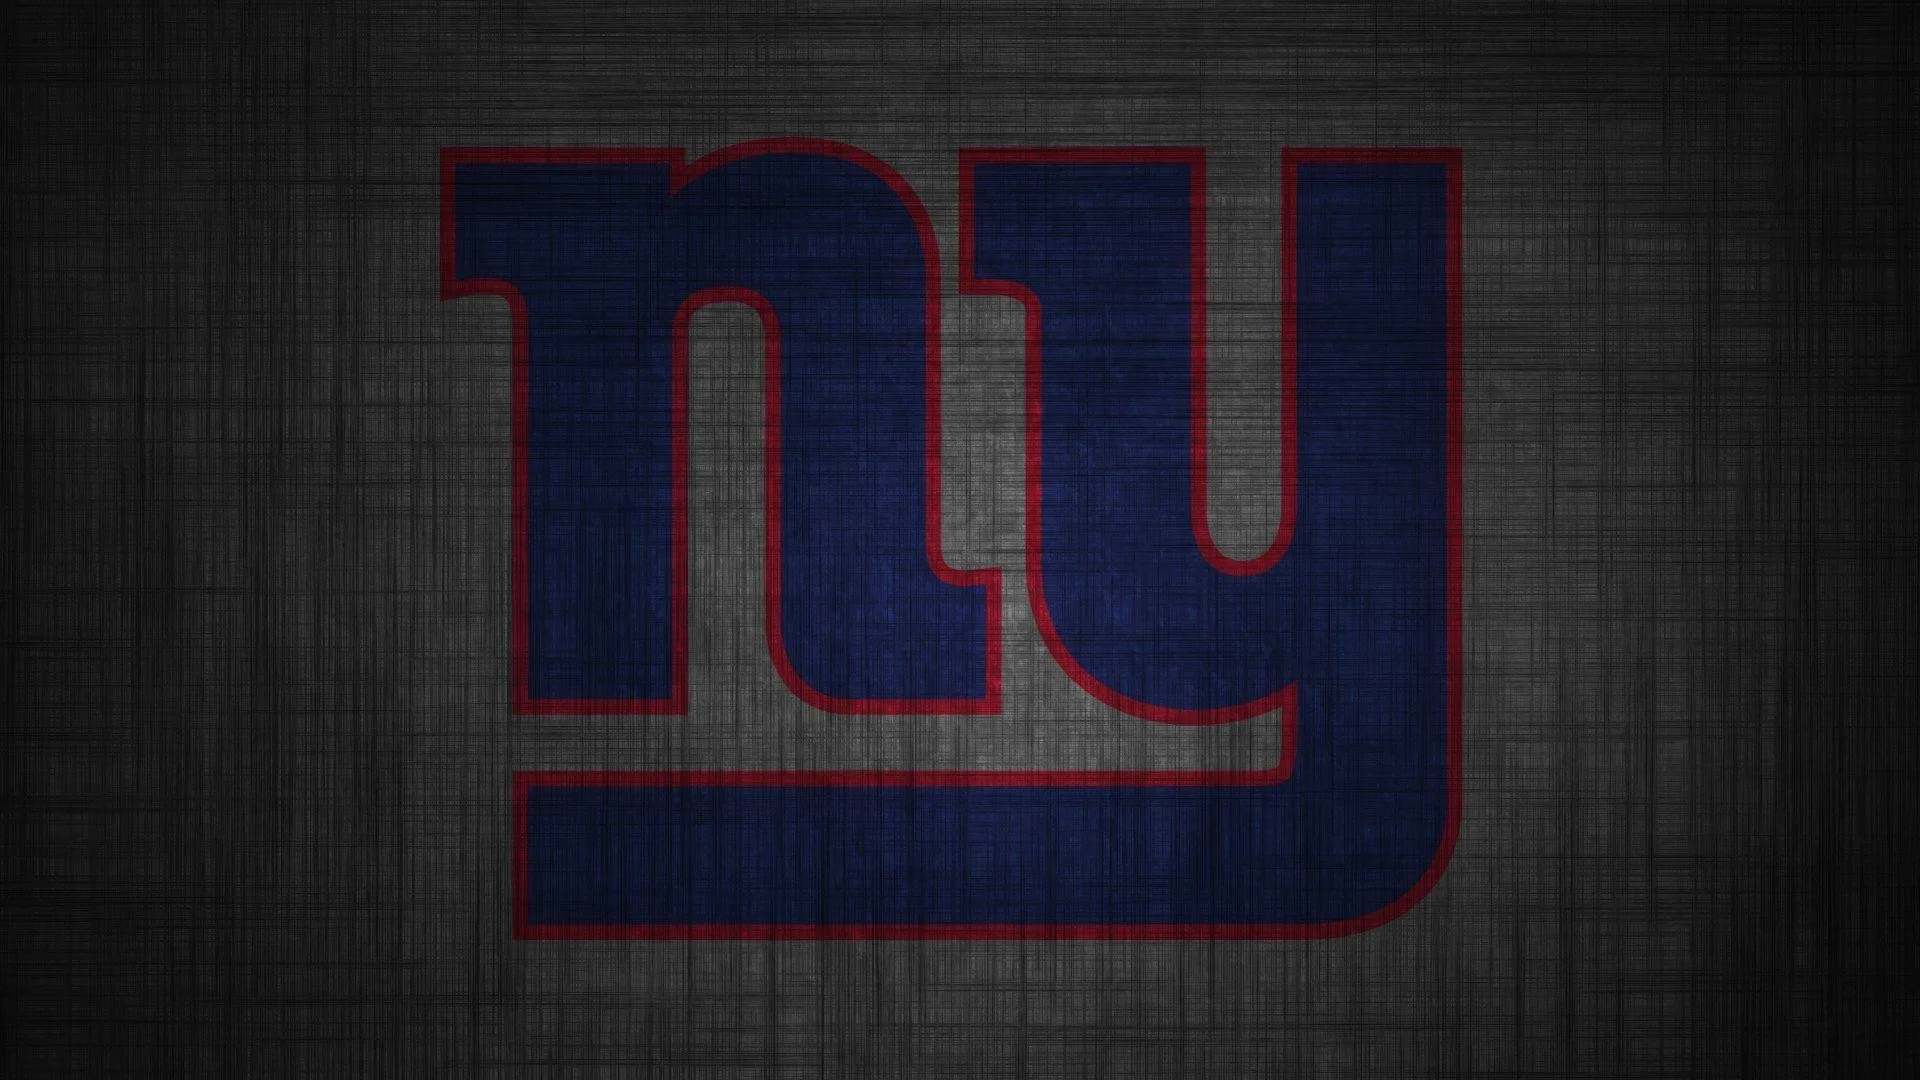 Ny Giants Wallpapers HD HD Wallpapers, Backgrounds, Images, Art .